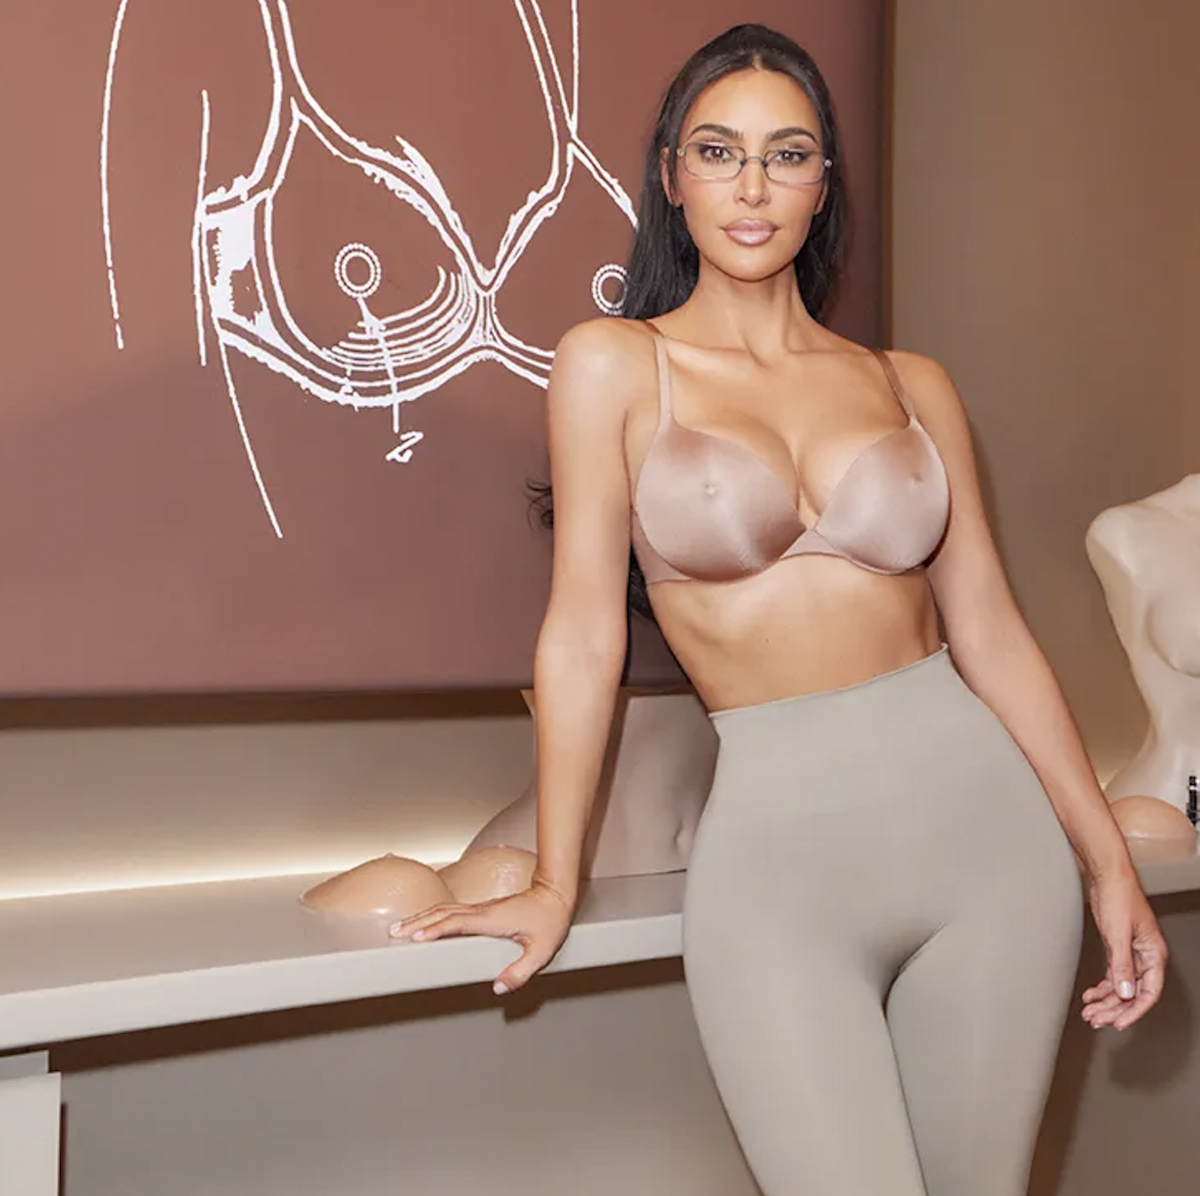 The world can't cope with Kim K's nipple bra and that says all you